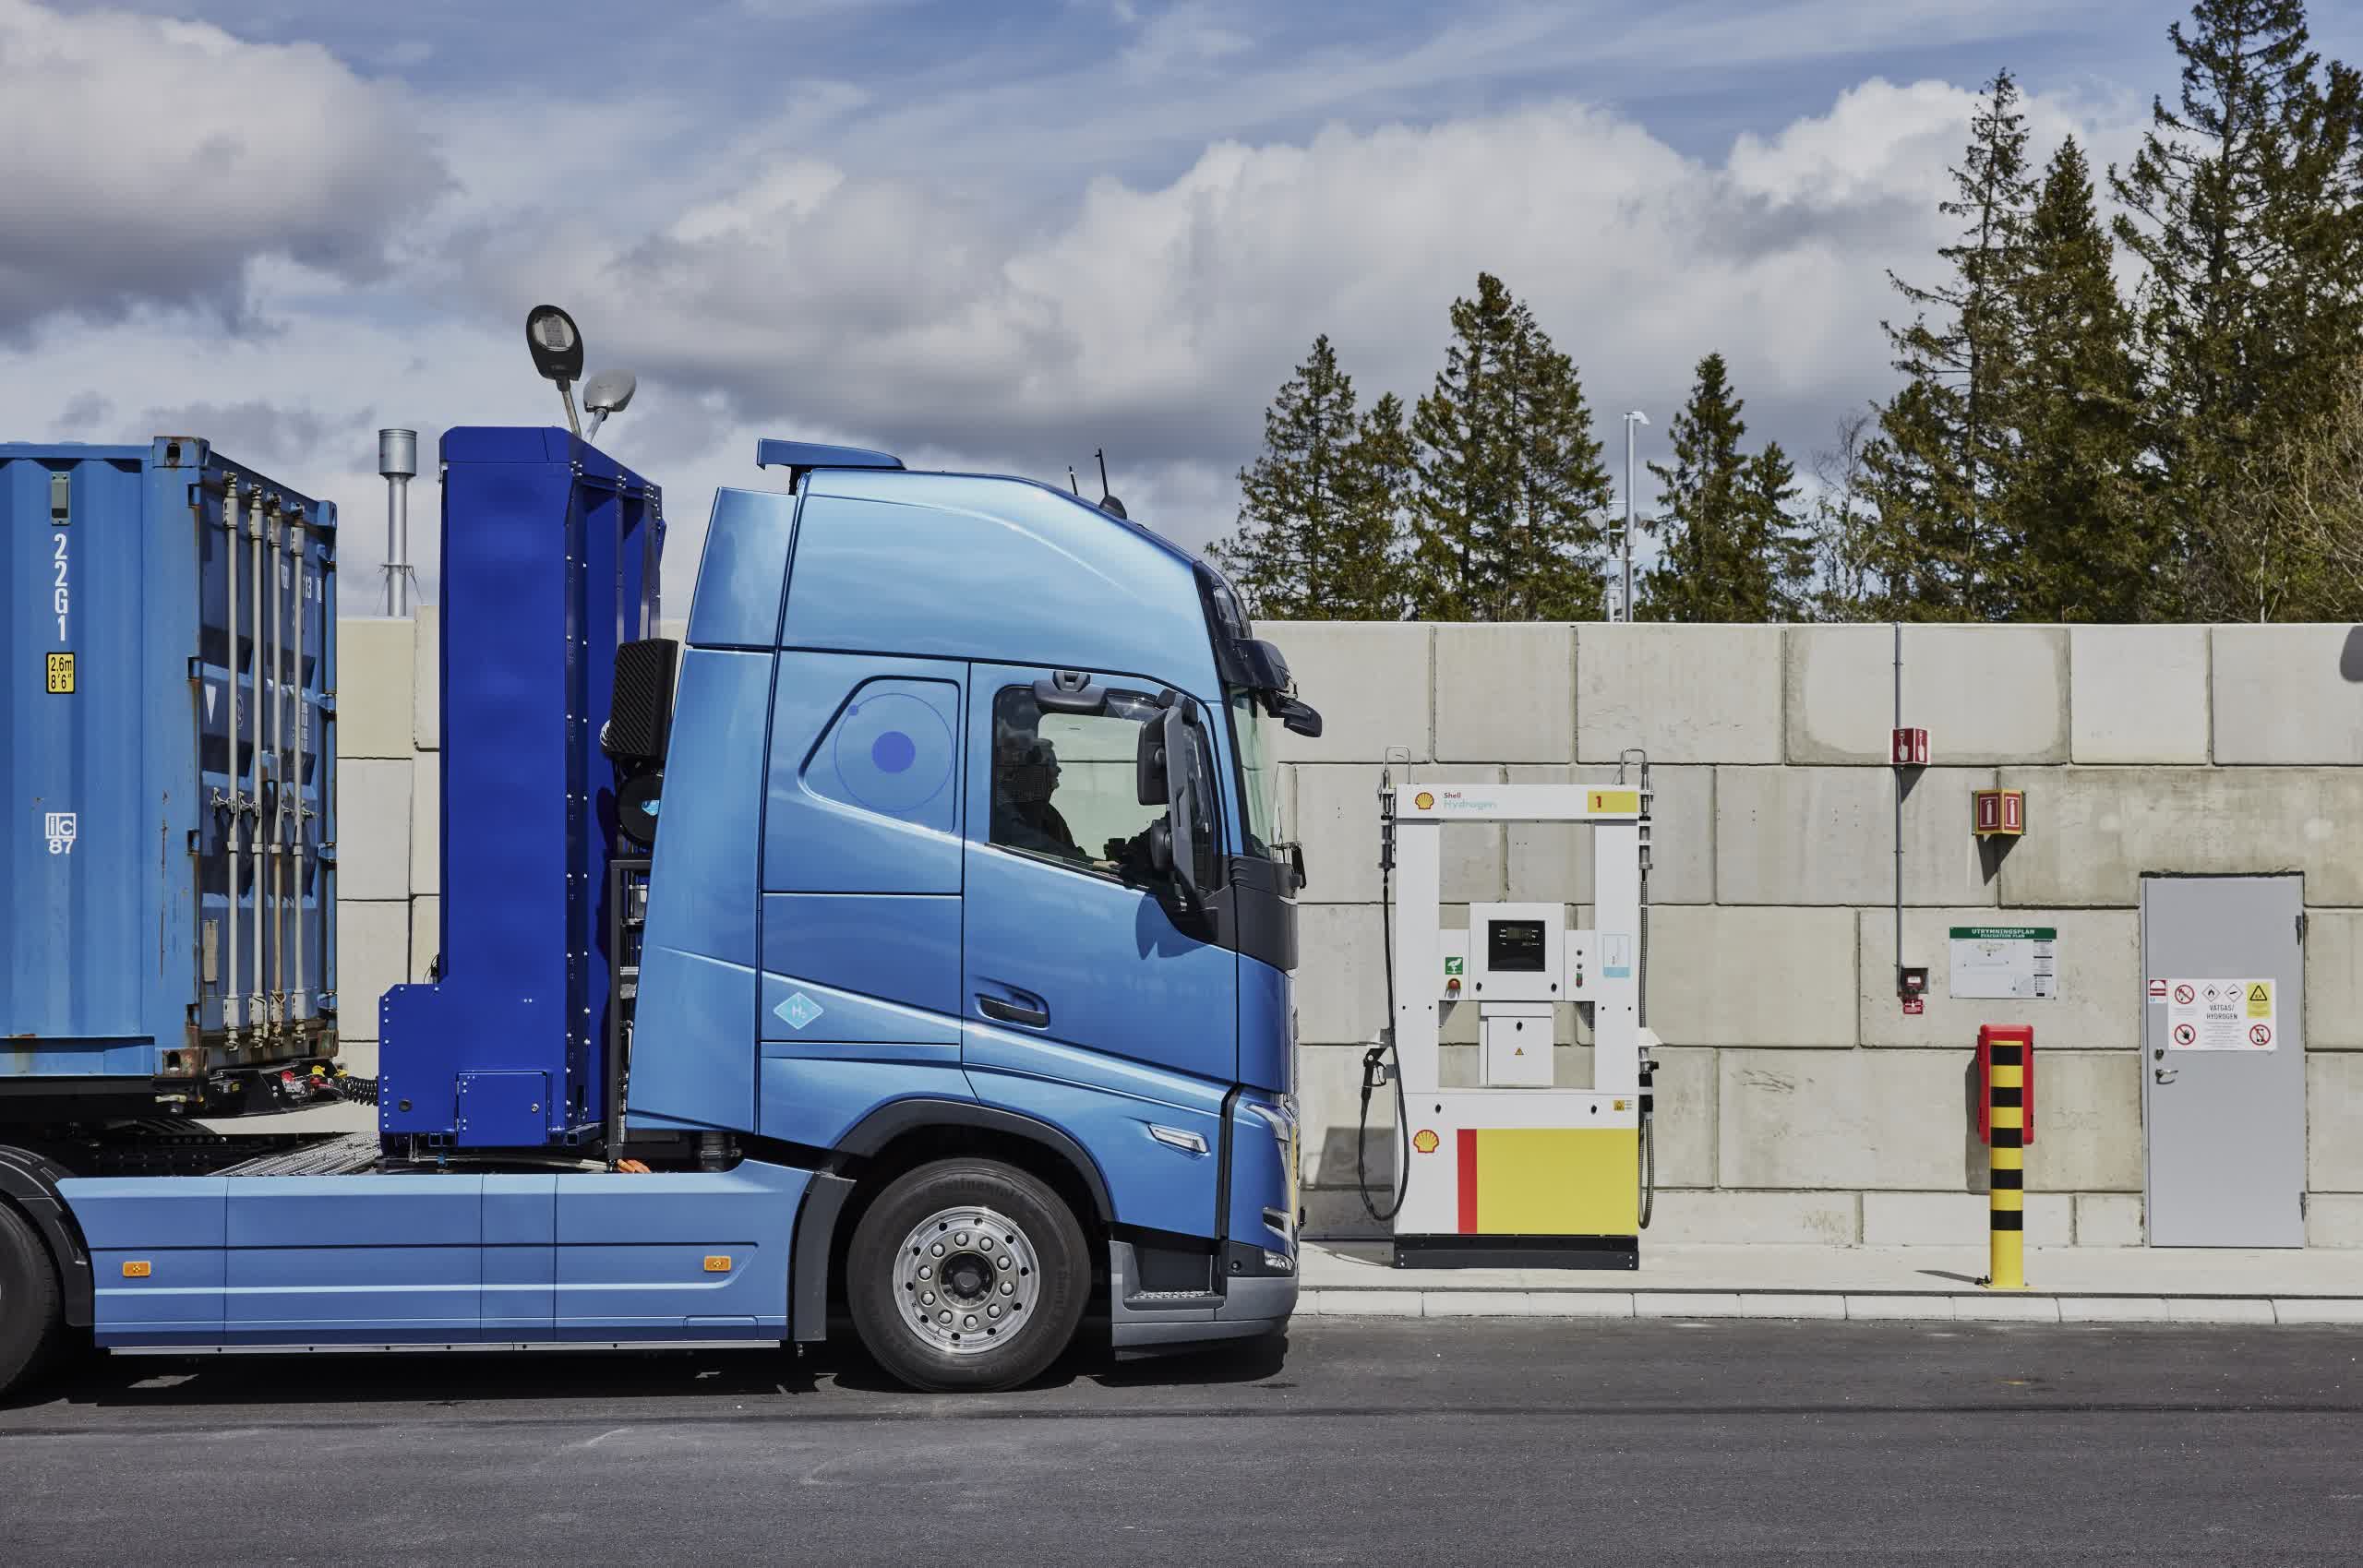 Upcoming hydrogen fuel cell semis from Volvo will have a 621-mile range